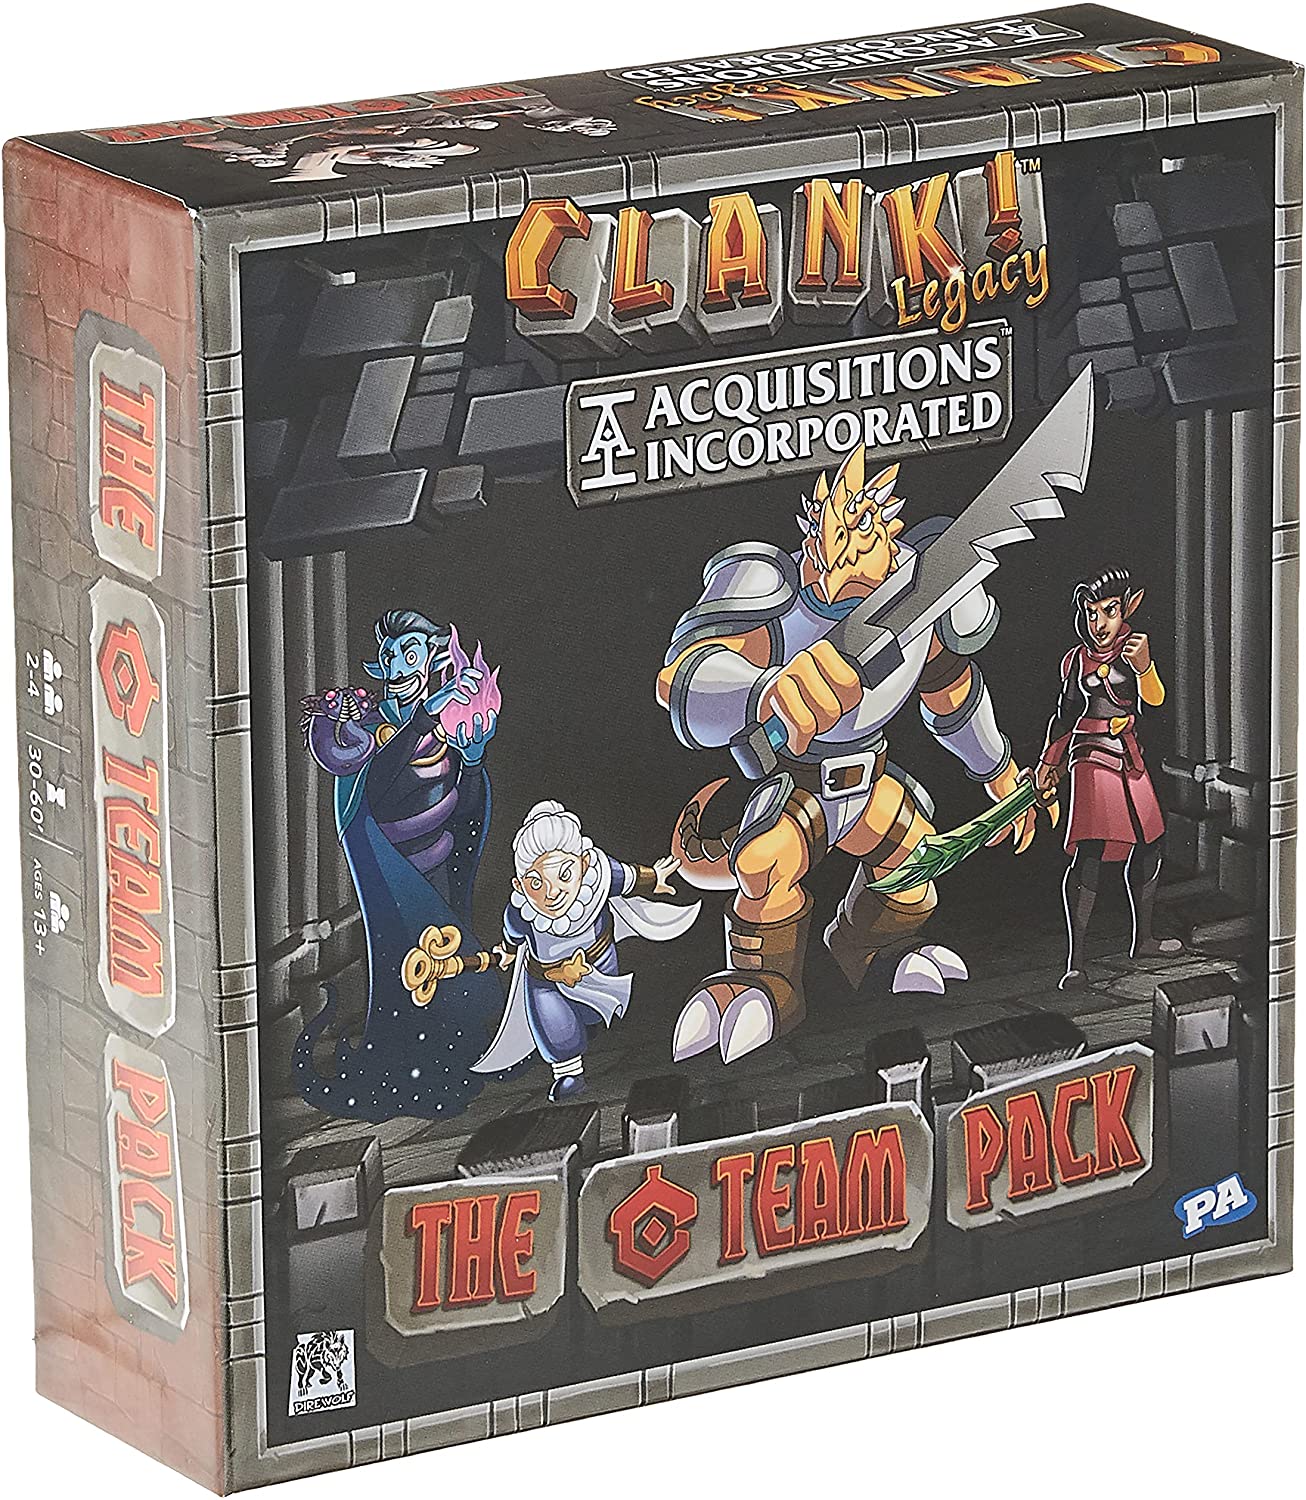 Renegade Games Clank! Legacy Acquisitions Incorporated: The "C" Team Pack